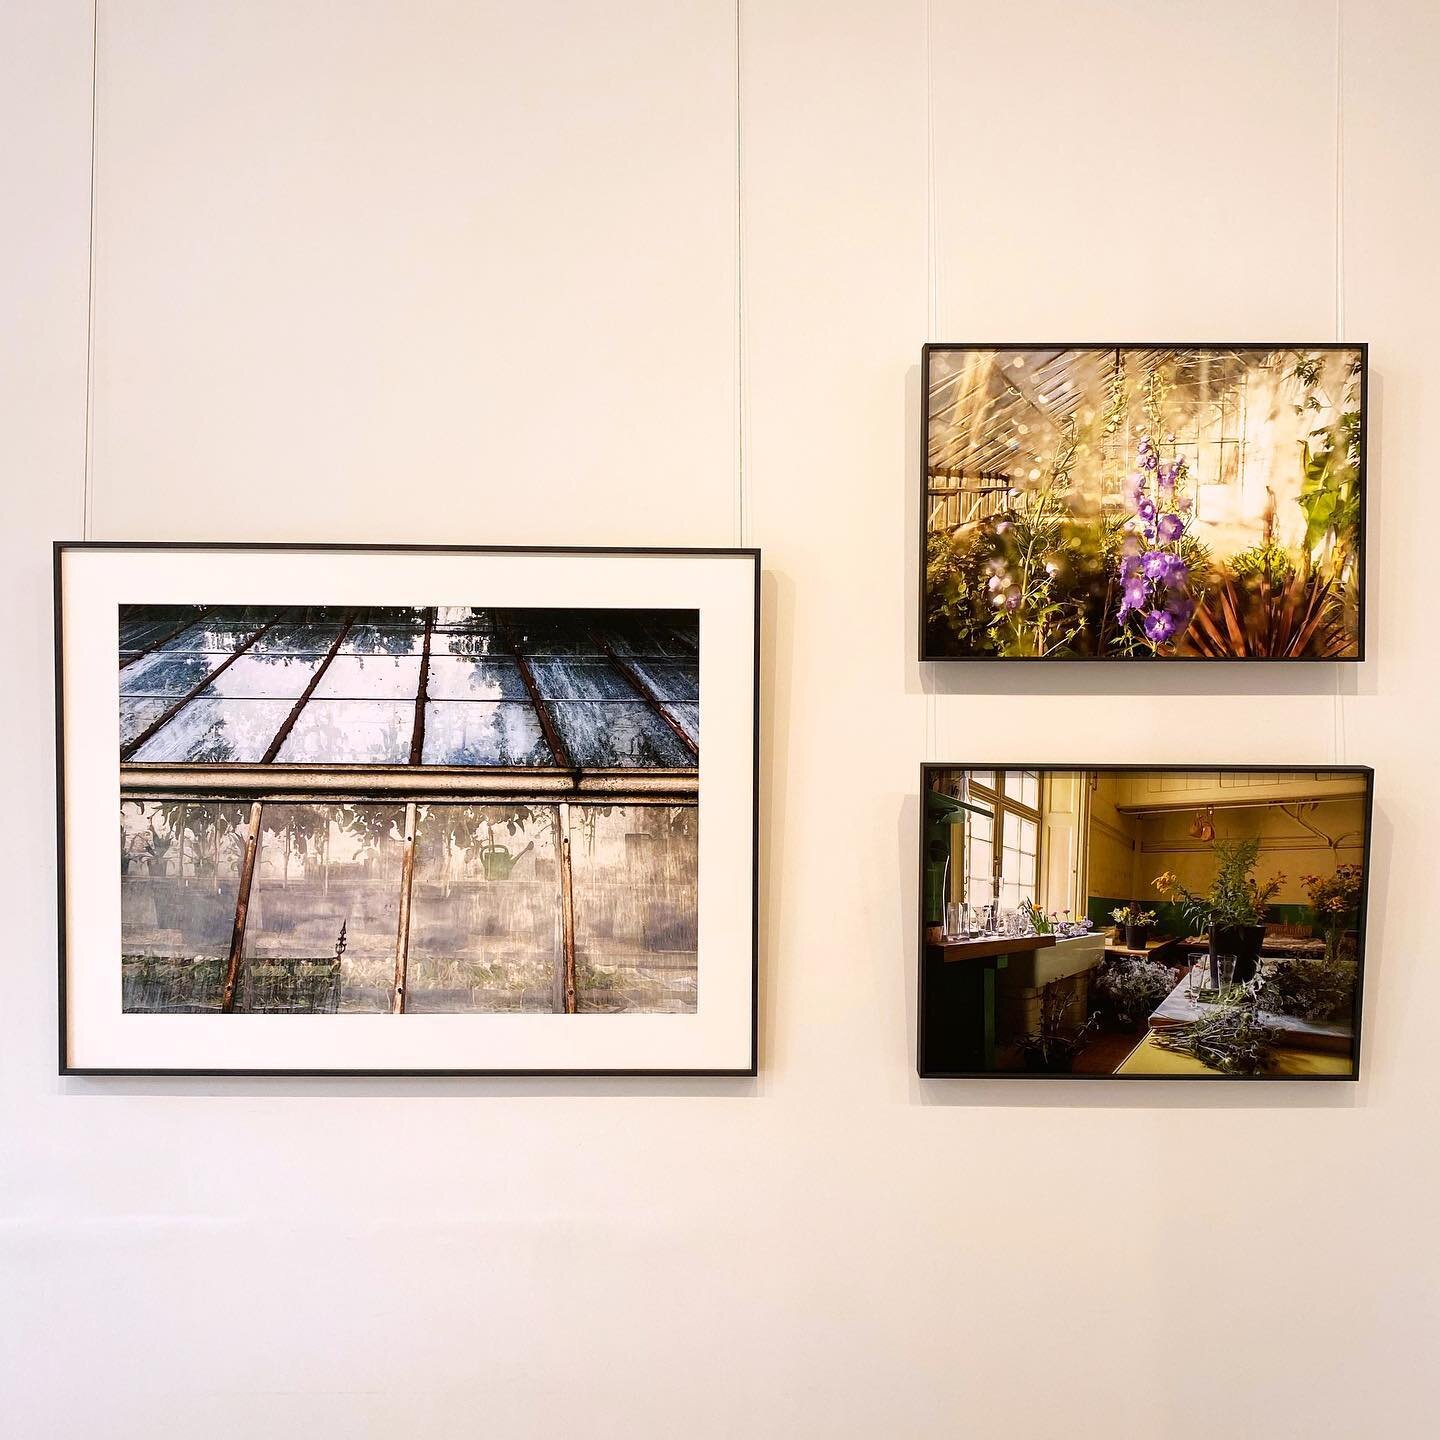 For the first time at Spring we have a photographic artist in our show, and what a special one we have found for you. 

Award winning photographer Amanda Harman has brought her series &lsquo;Garden Stories&rsquo;, which gives the viewer a candid view